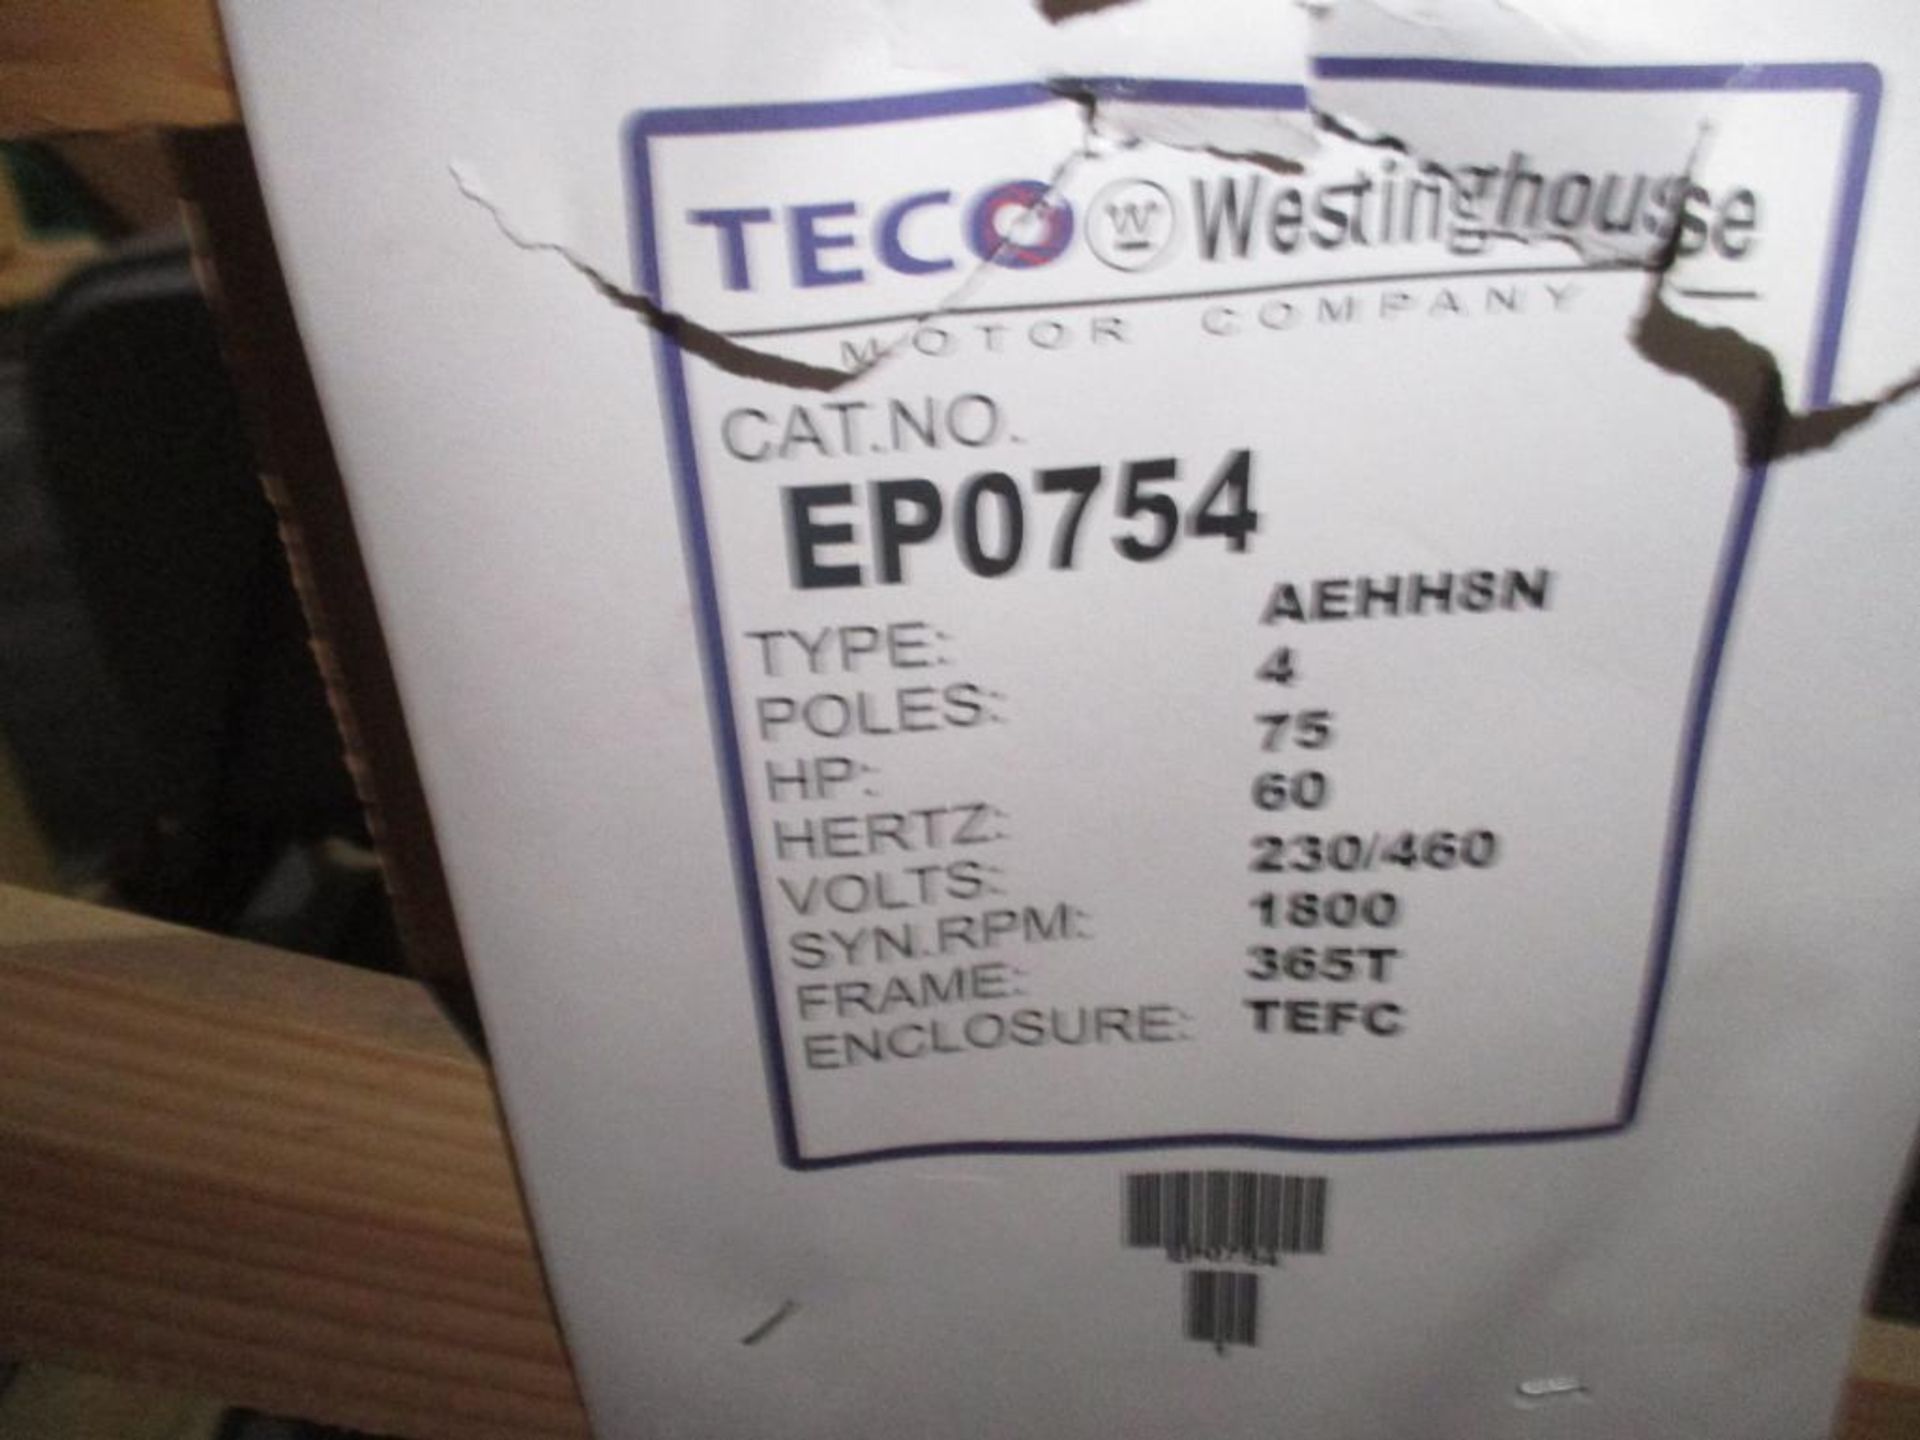 WESTINGHOUSE 3PHASE 75HP 1800RPM 365T FRAME A/C MOTOR P/N EP0754 1062# LBS (THIS LOT IS FOB KNOXVILL - Image 6 of 6